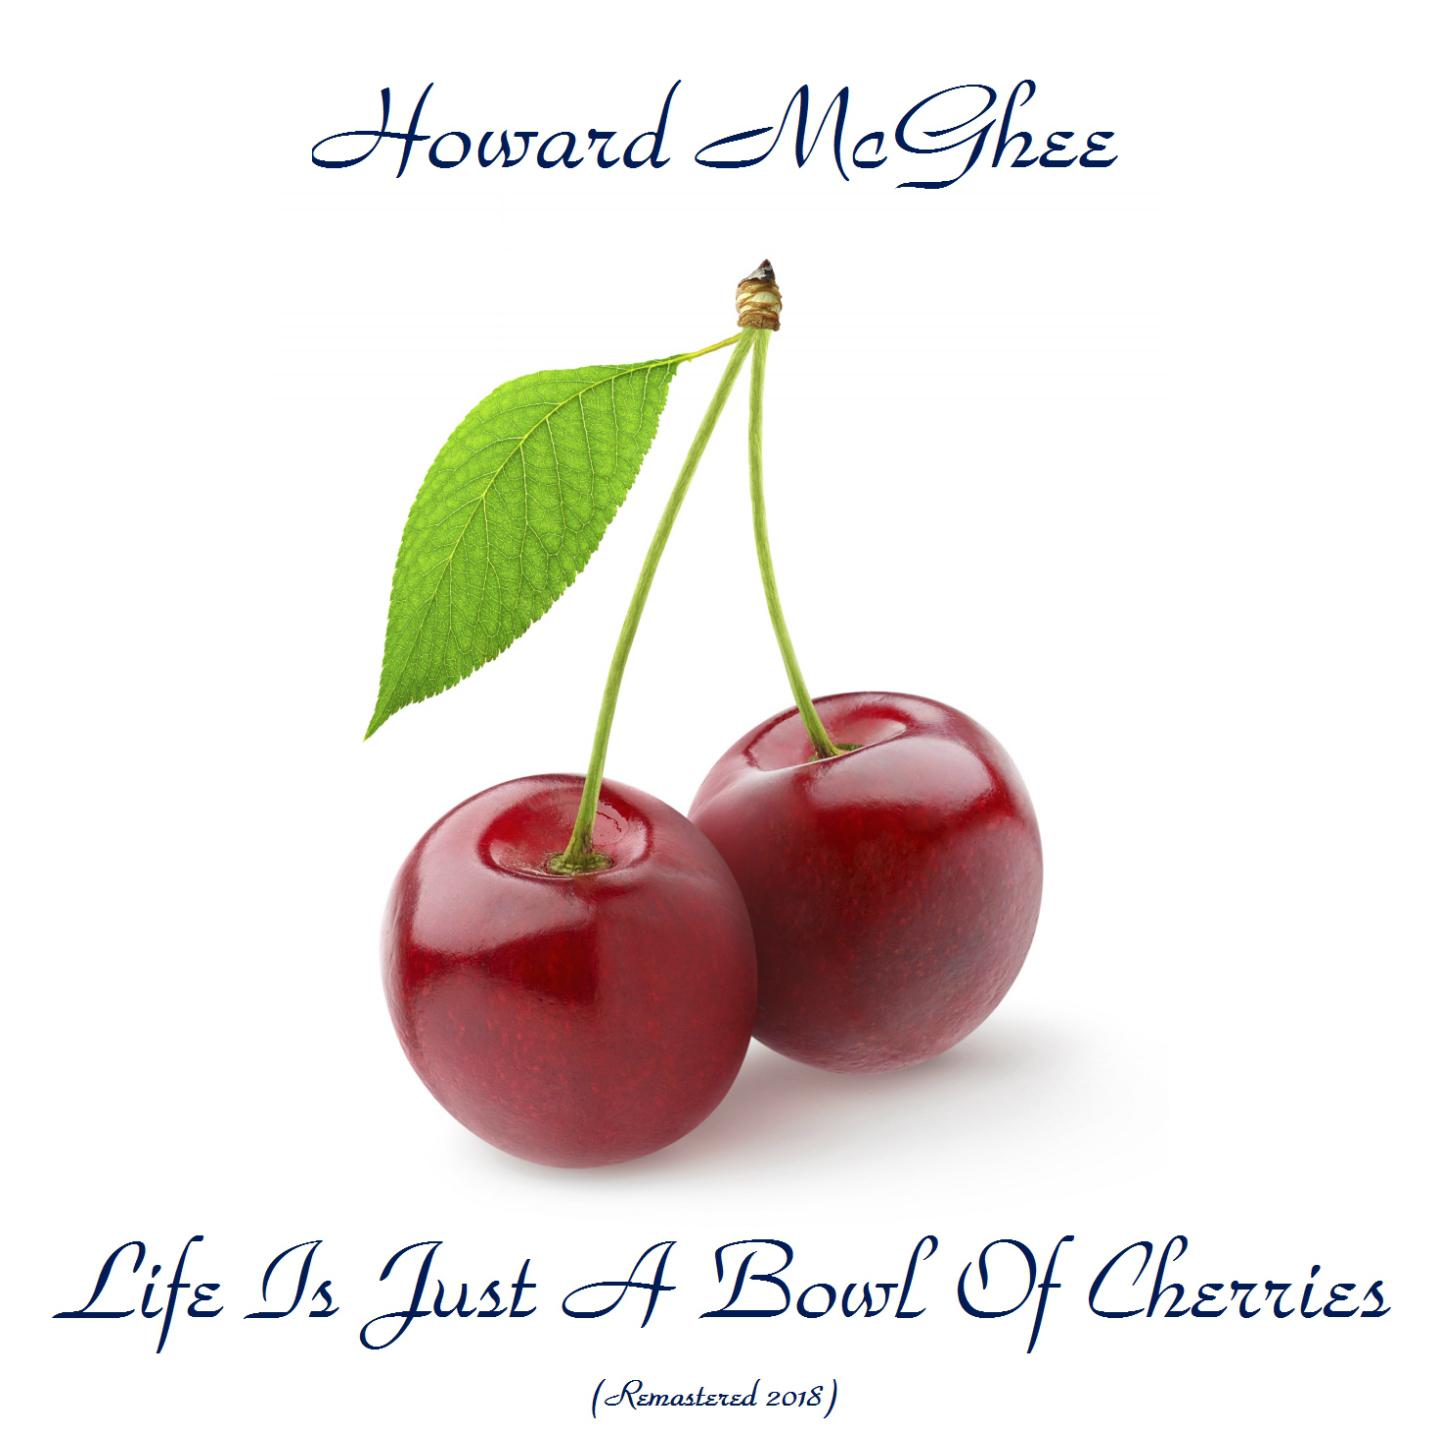 Life Is Just A Bowl Of Cherries (Remastered 2018)